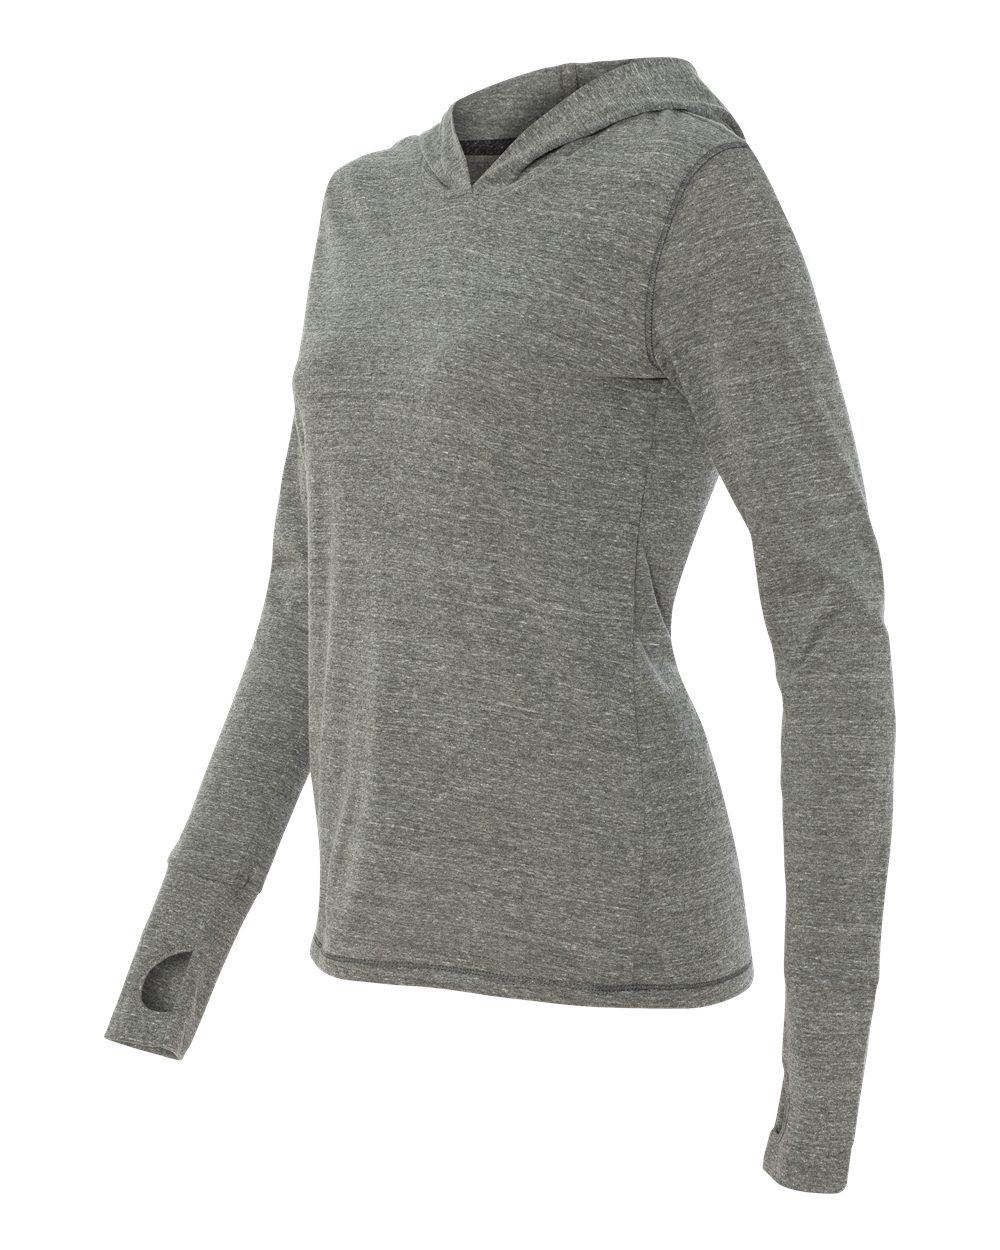 alo - Ladies' Triblend Long Sleeve Hooded Pullover